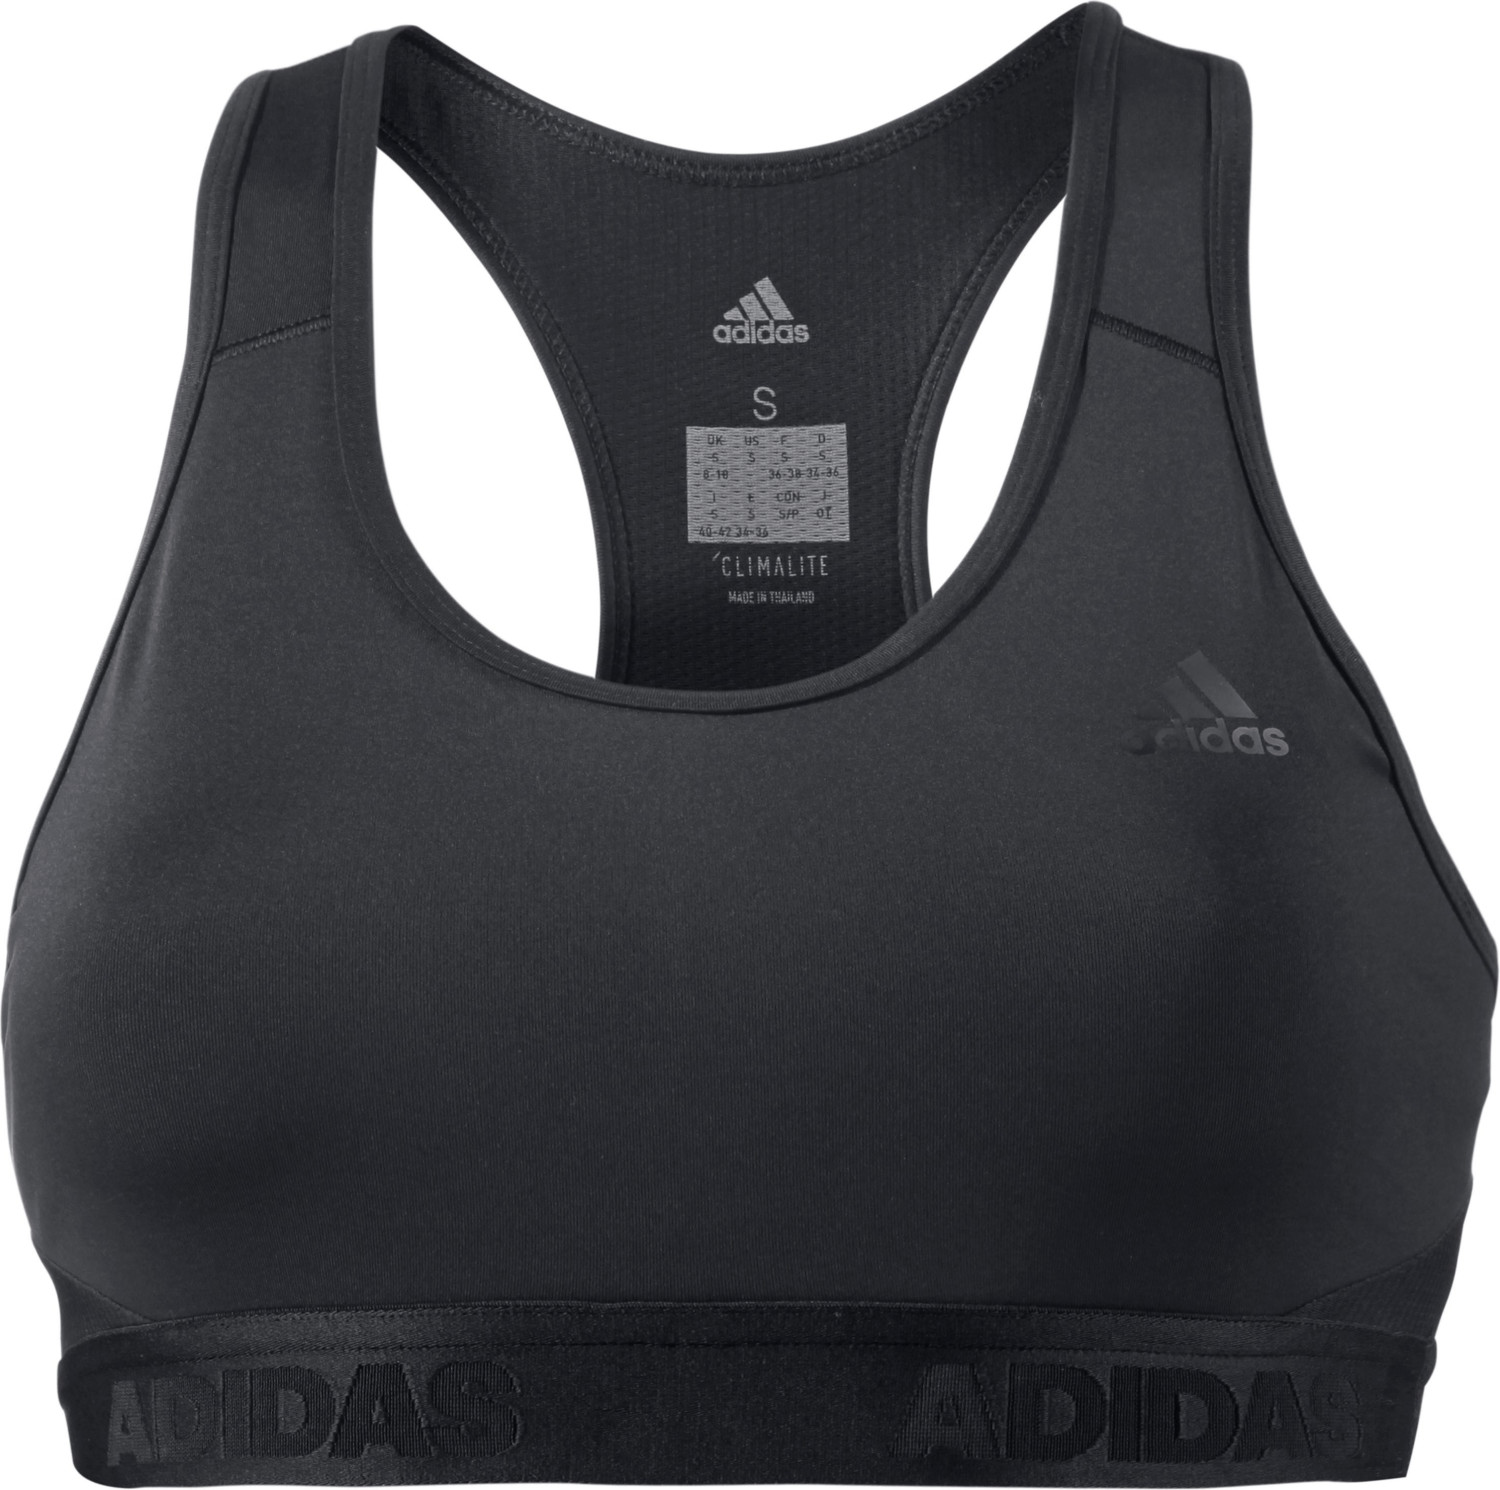 Buy Adidas Don T Rest Alphaskin Sport Bh From 17 50 Today Best Deals On Idealo Co Uk